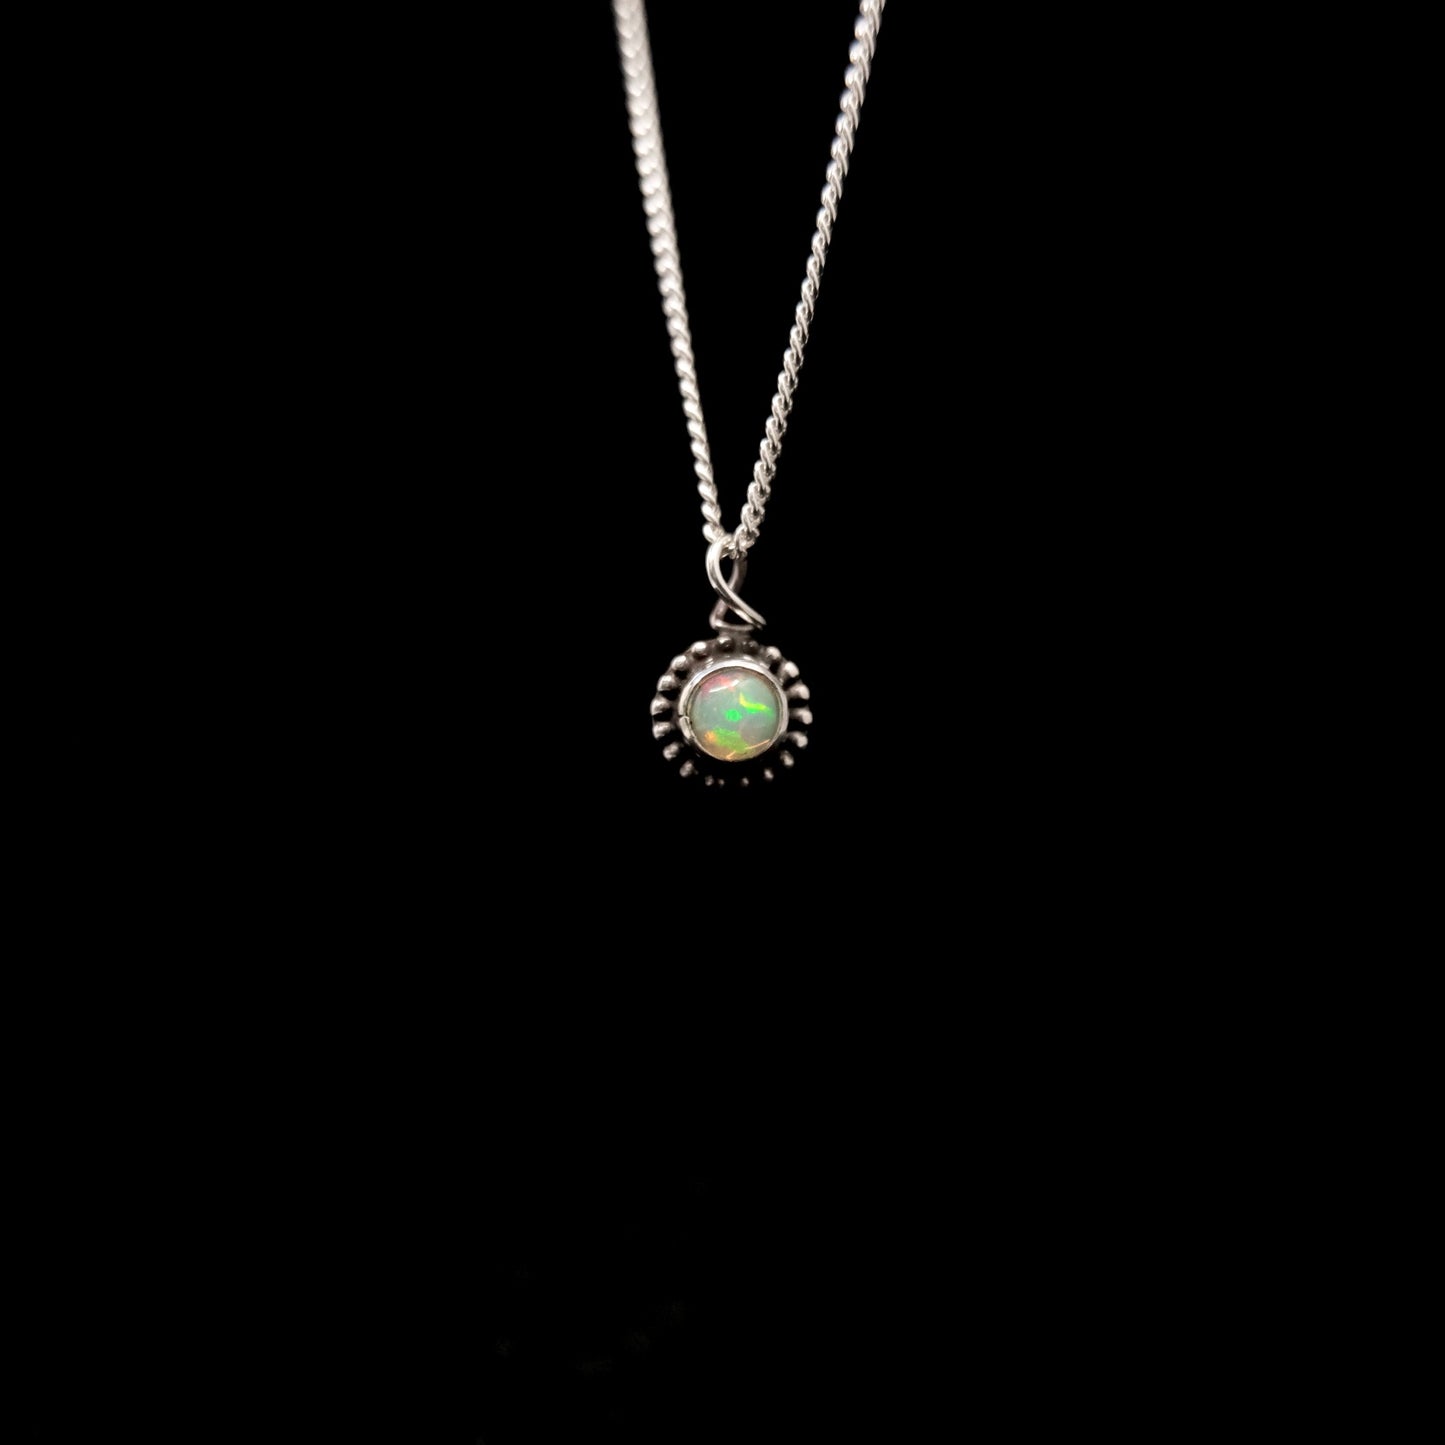 Opal Layering Necklace